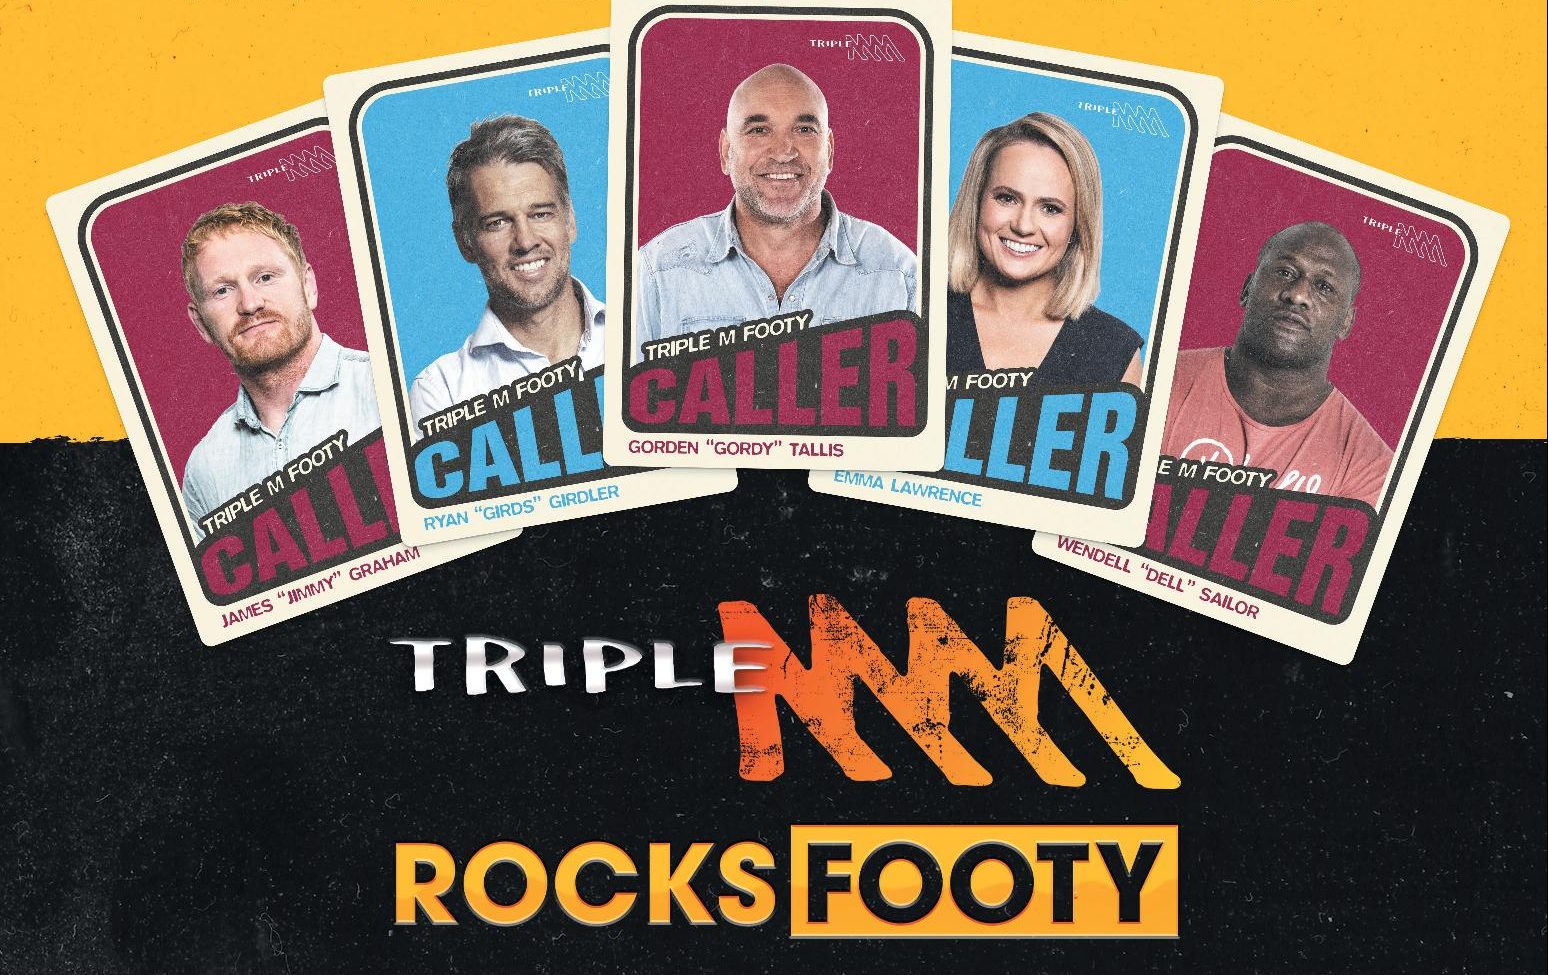 MG and Wally Lewis come together for Triple M State of Origin commentary